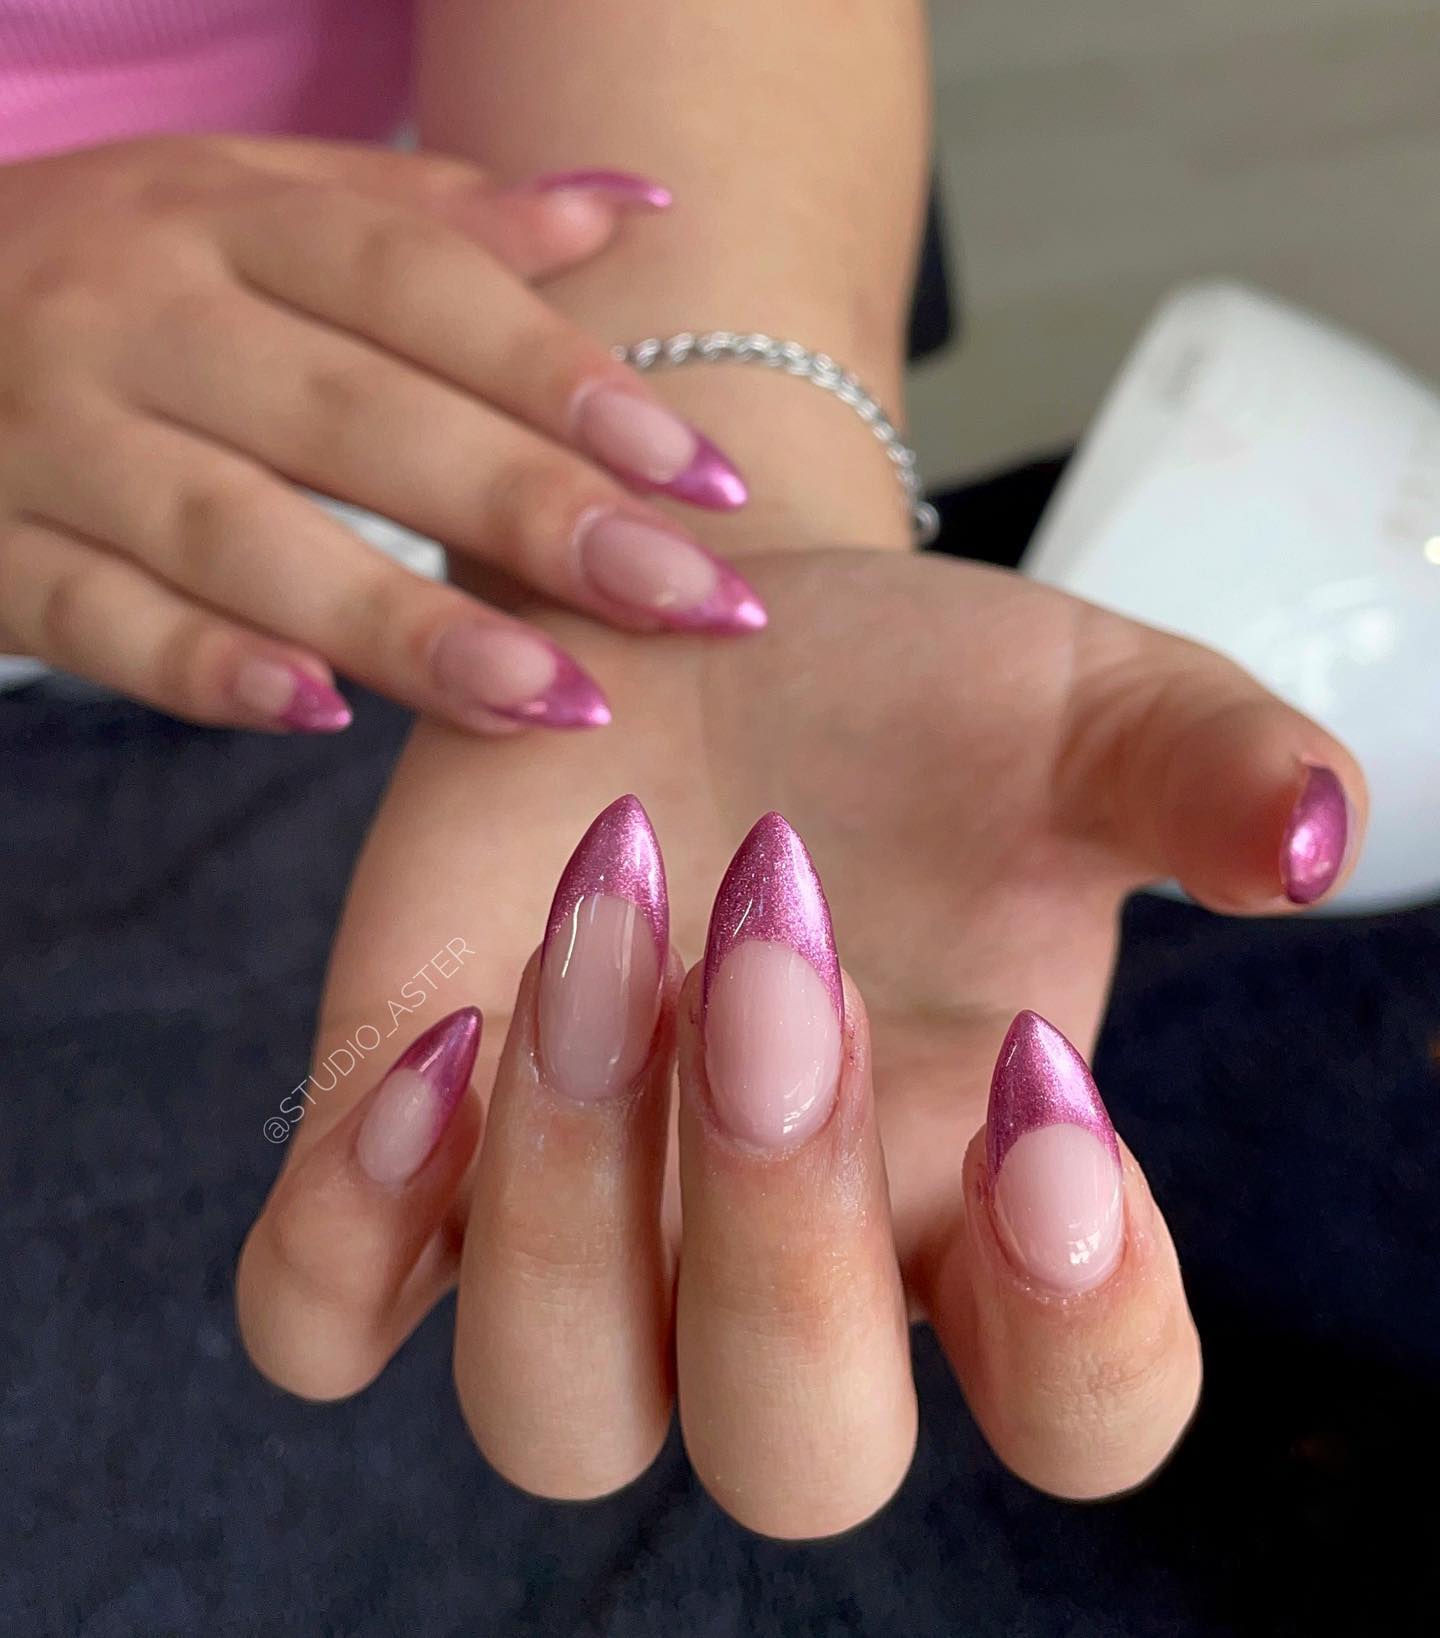 As a classic, French mani is always ready to make your nails gorgeous! So, you can get this gorgeous look with pink chrome tips, too.